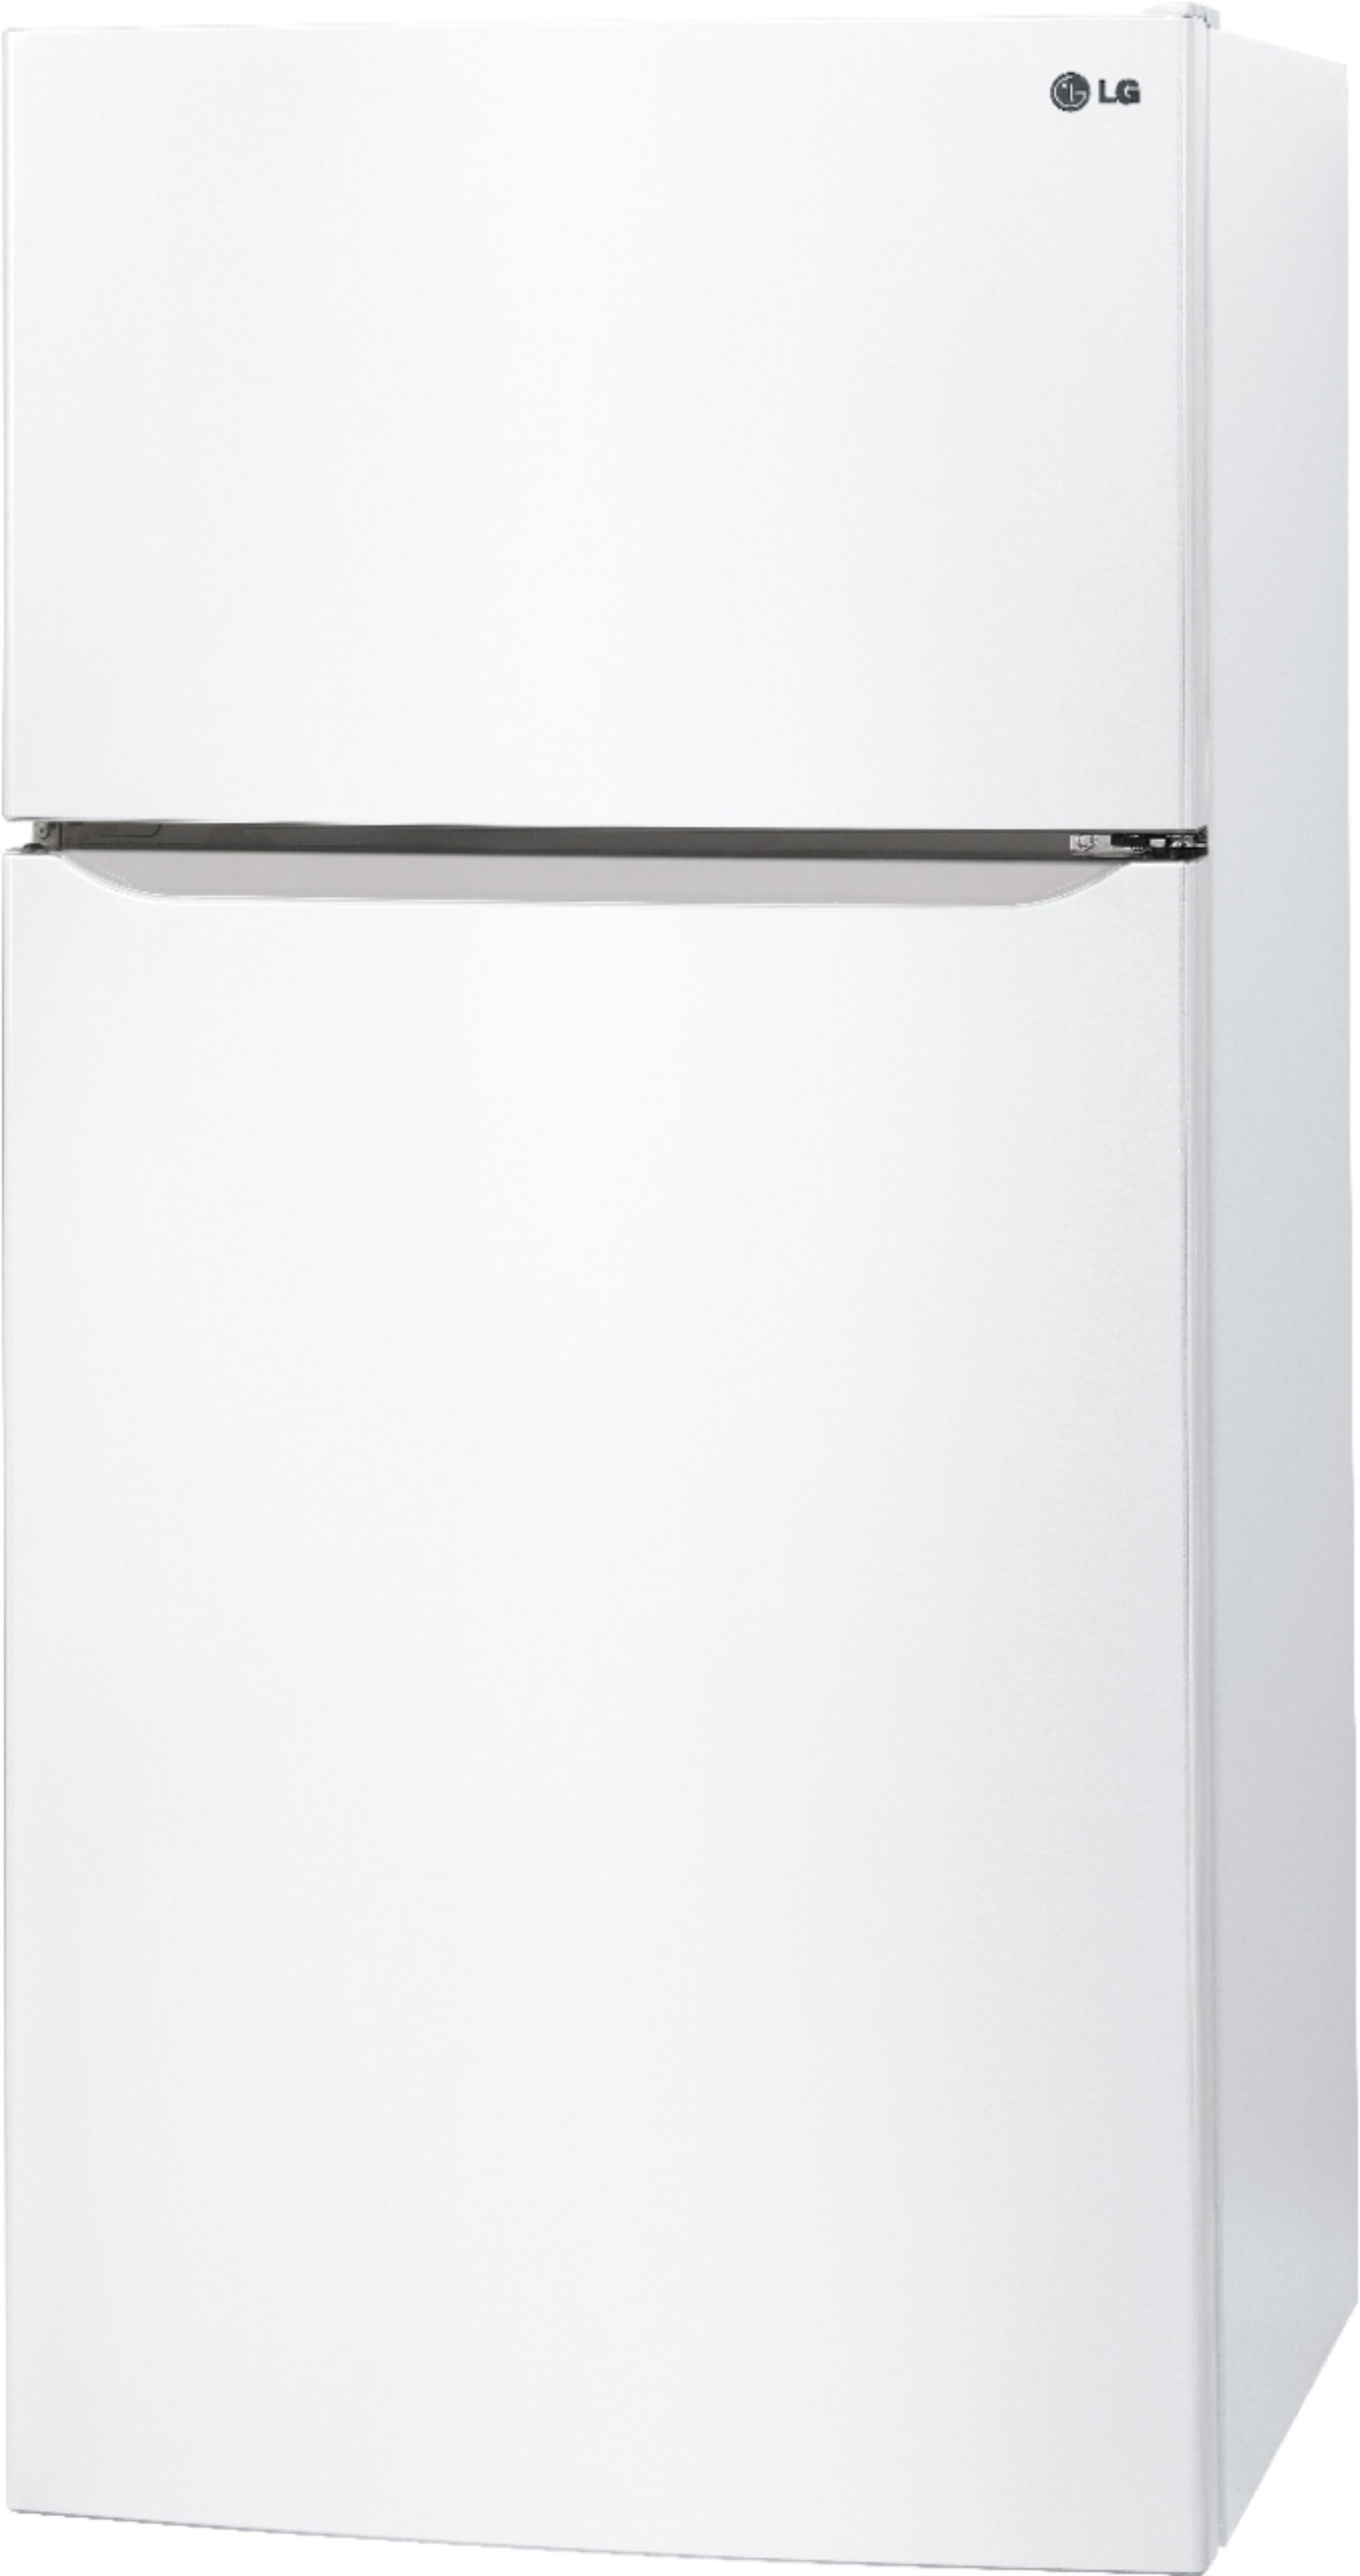 Left View: Whirlpool - 10.6 Cu. Ft. Frost-Free Top-Freezer Refrigerator - White